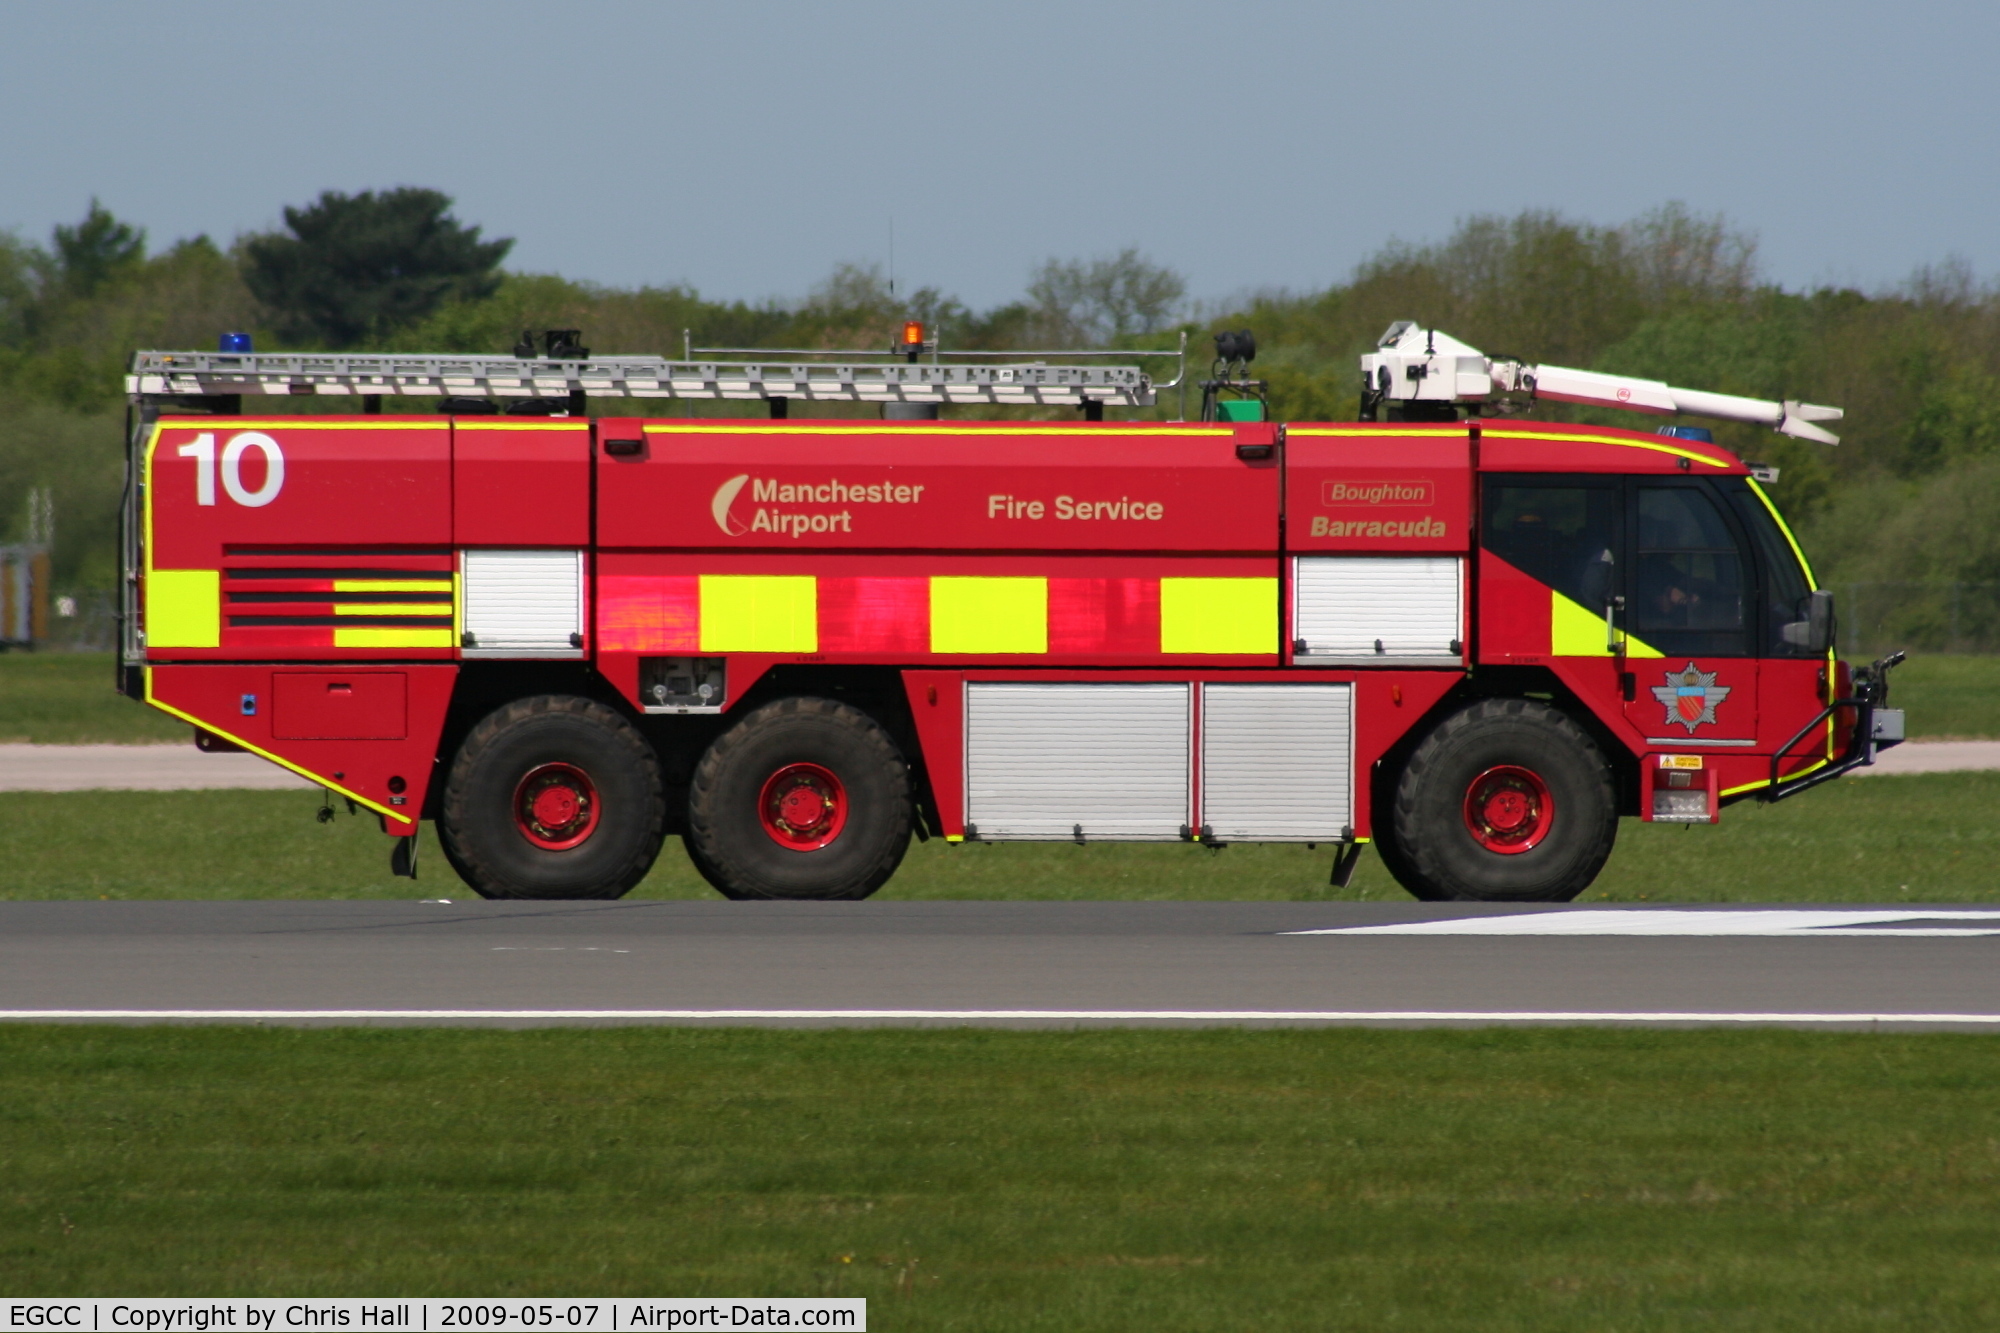 Manchester Airport, Manchester, England United Kingdom (EGCC) - Fire engine at Manchester Airport